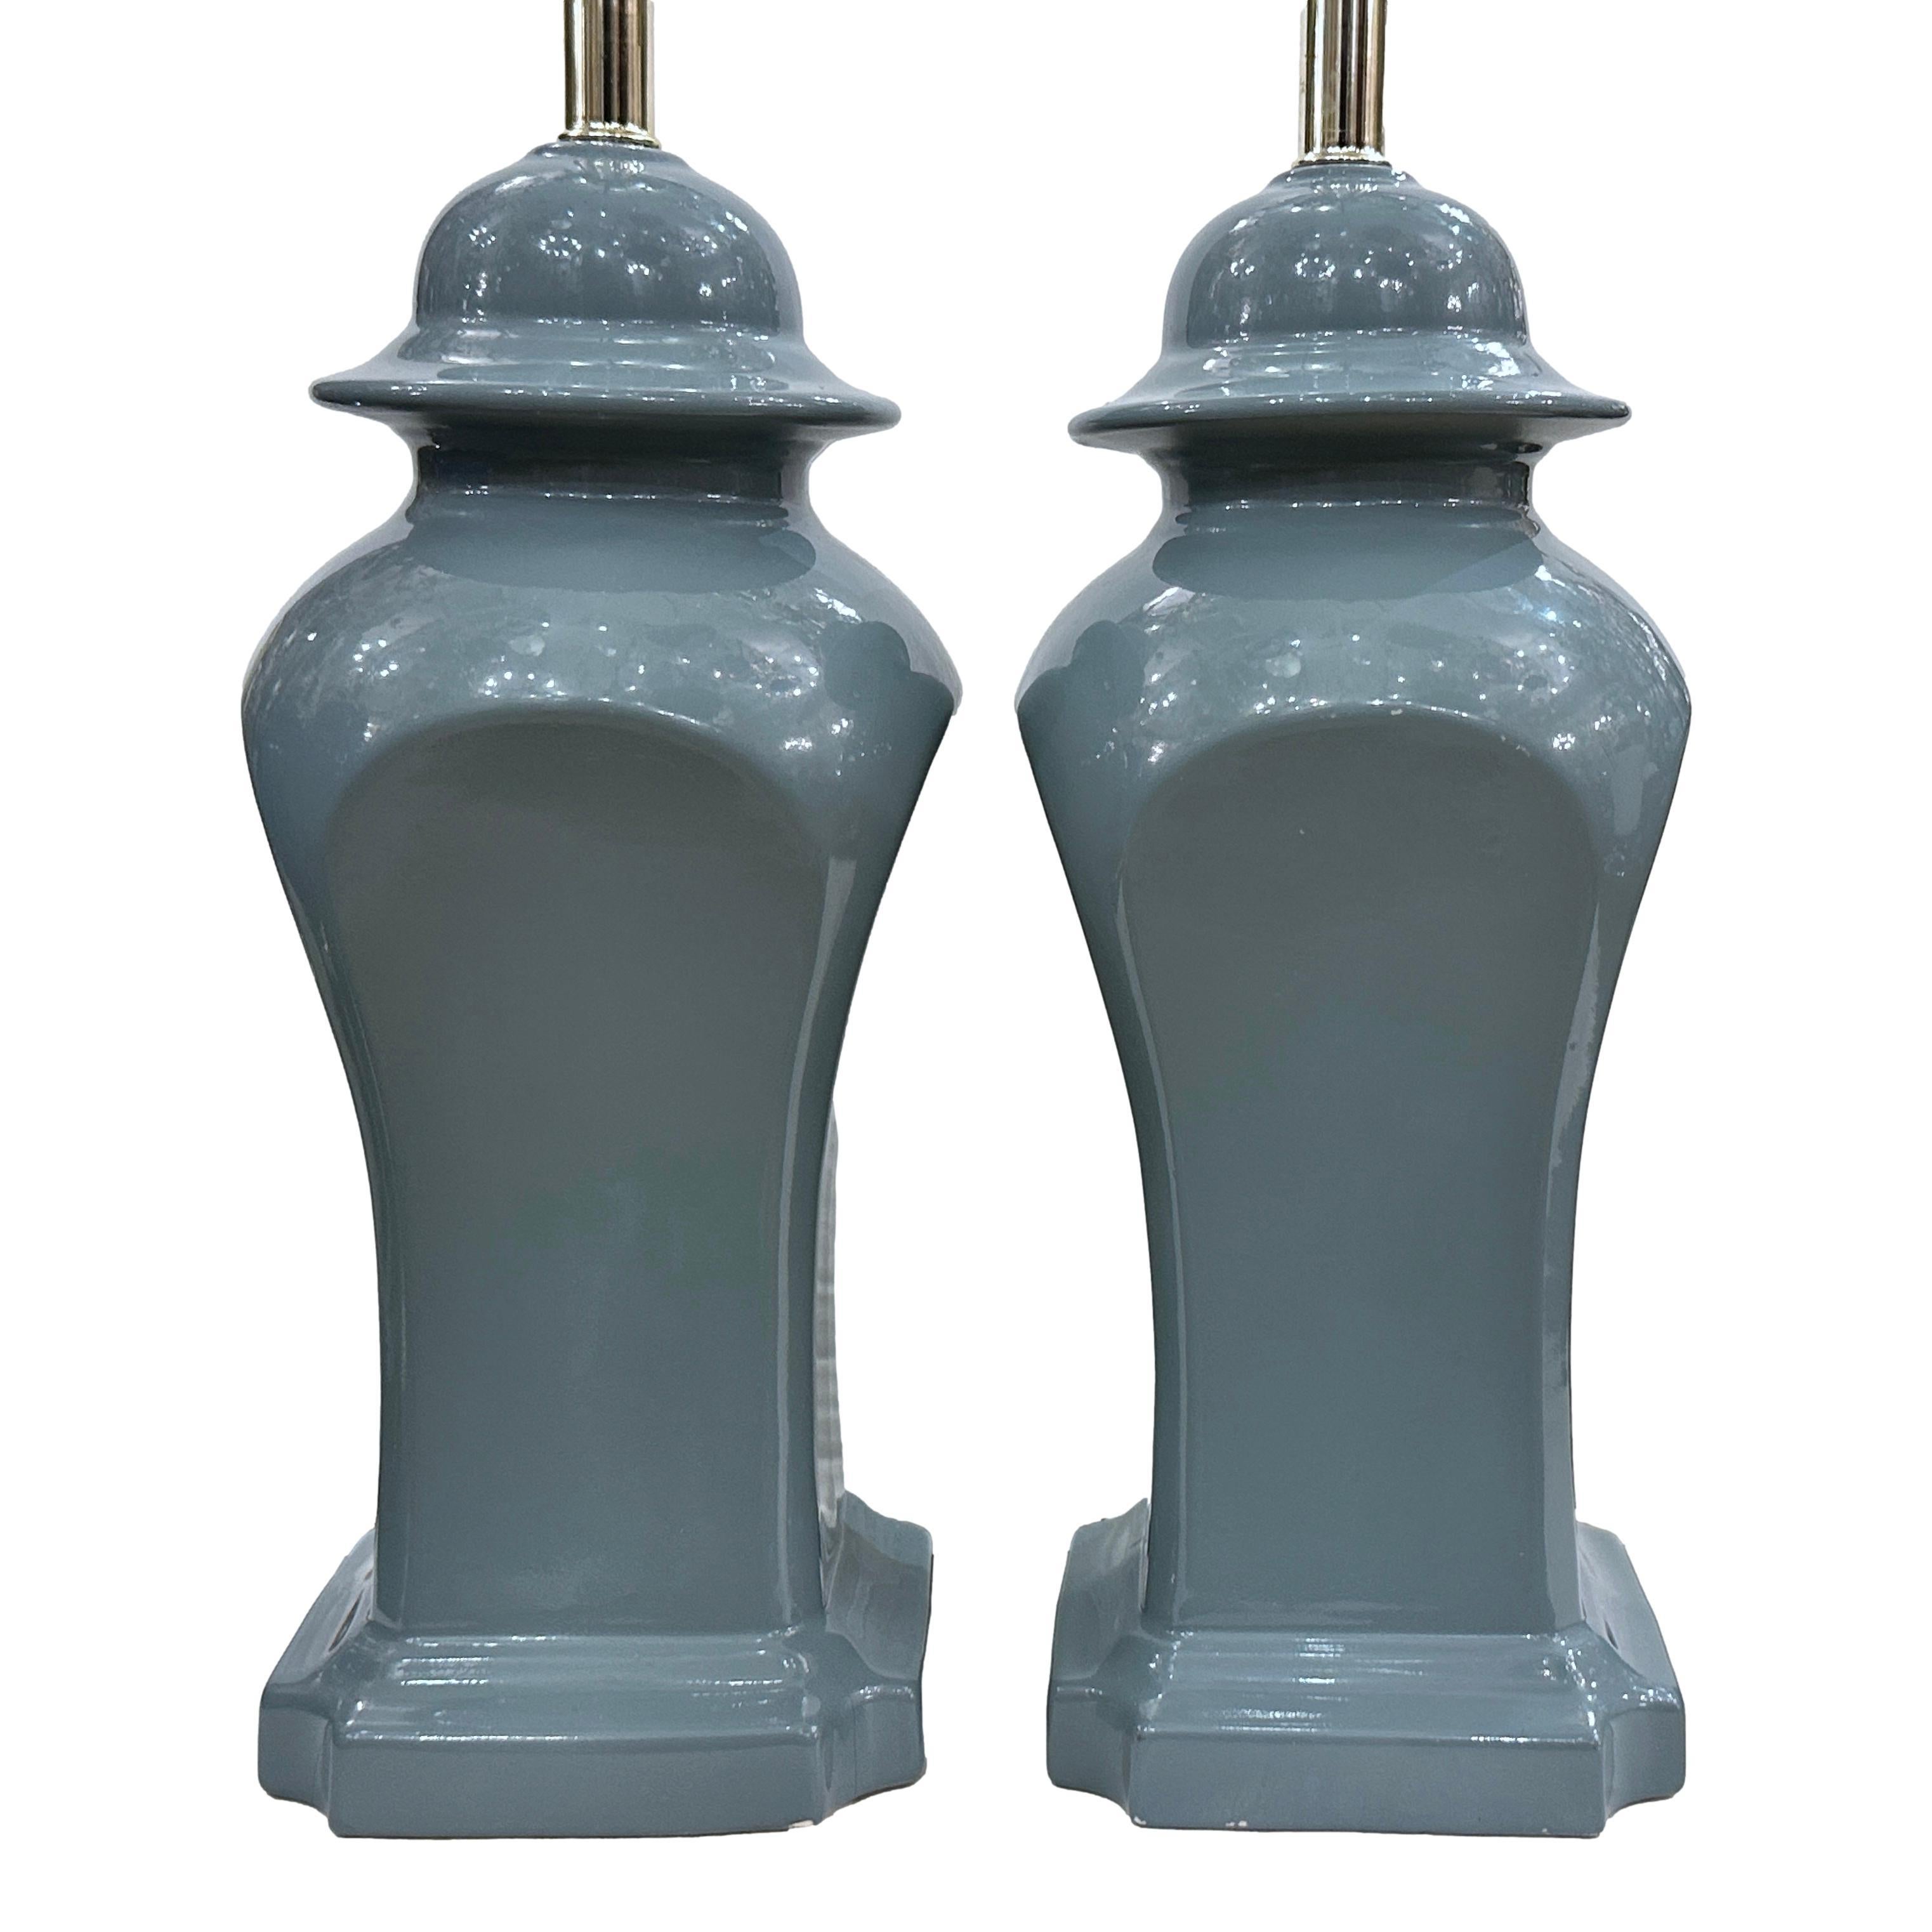 Pair of circa 1970's French porcelain table lamps with square urn shape.

Measurements:
Height of body: 17